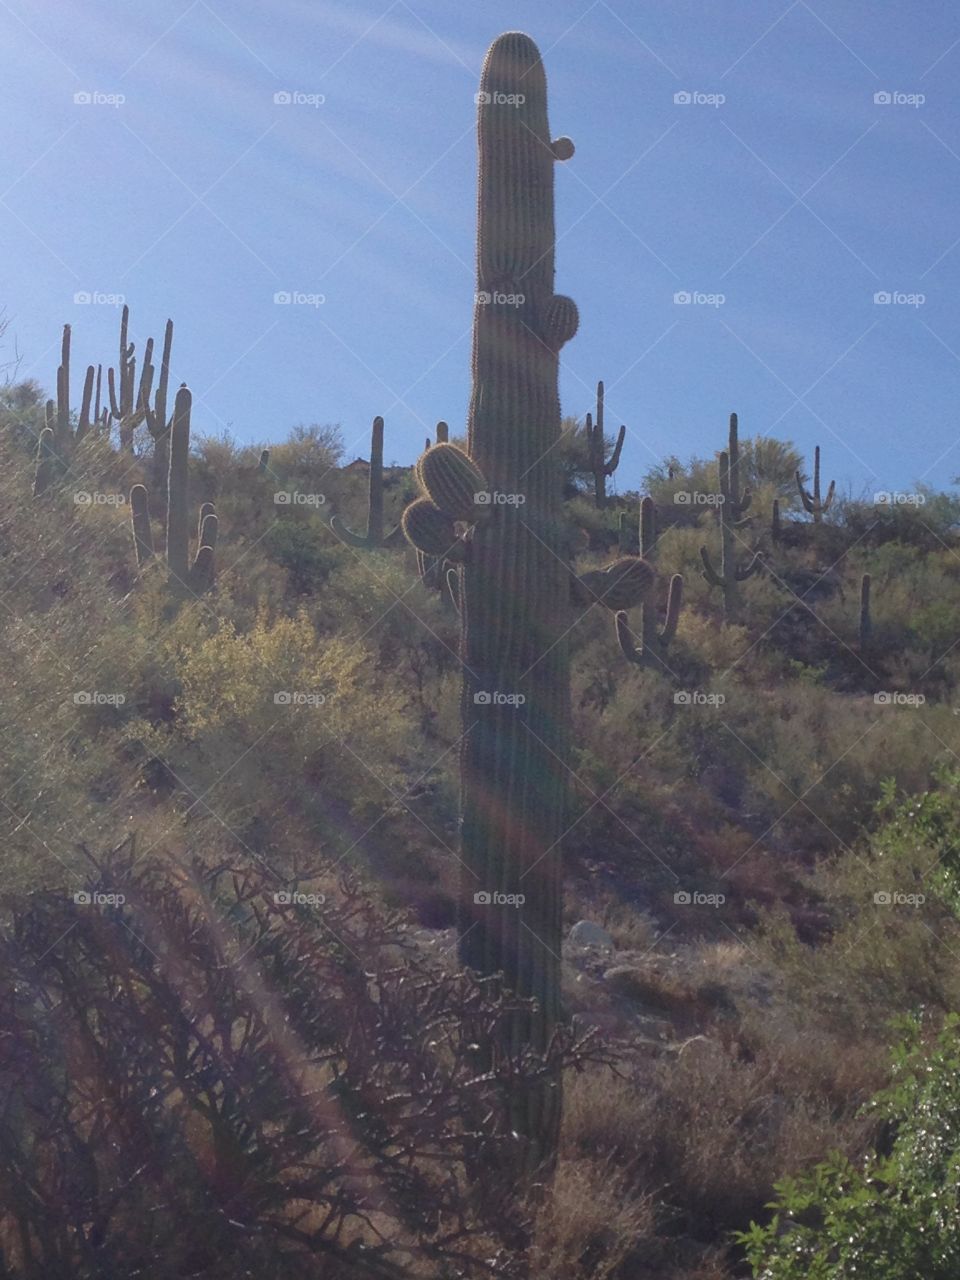 Morning Tucson . View of Tucson hill side